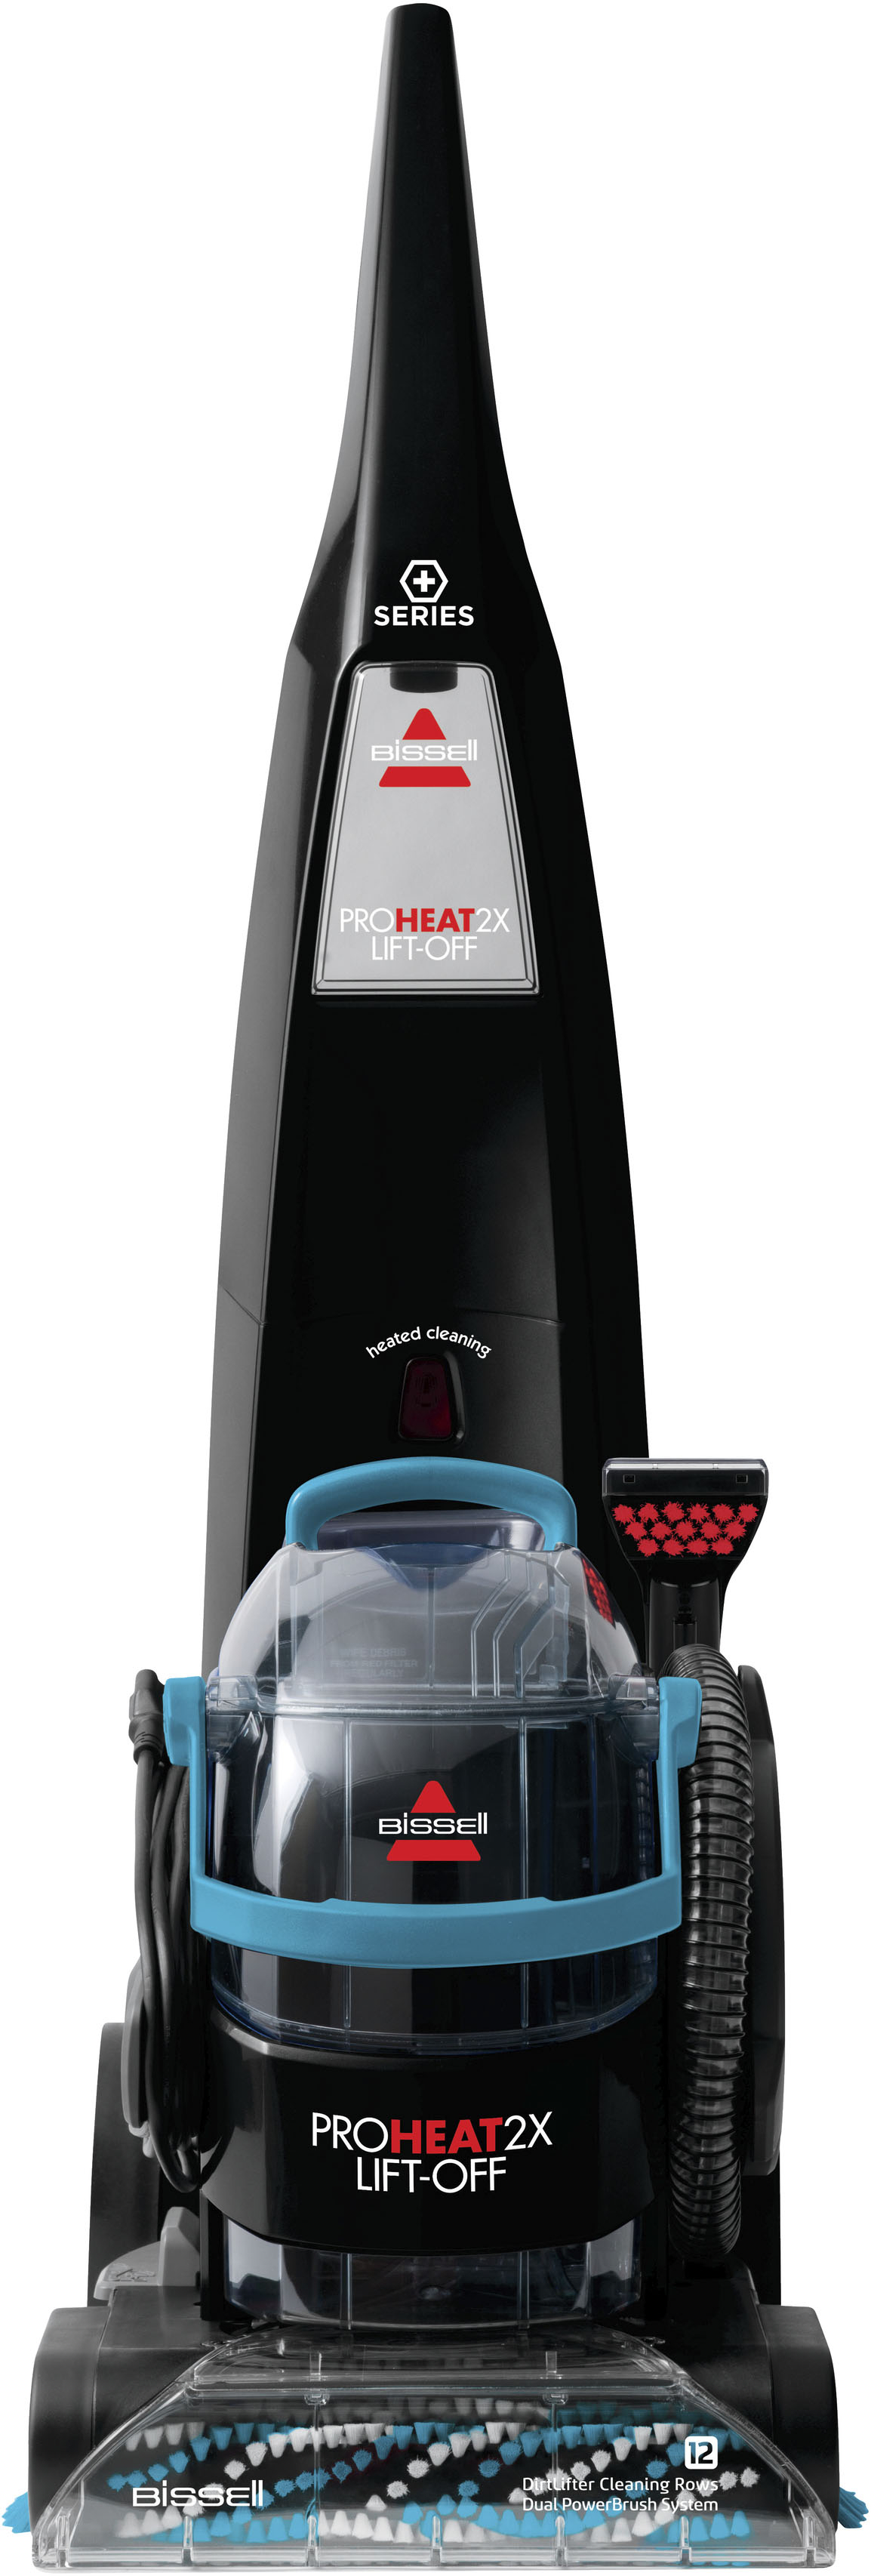 BISSELL ProHeat 2X Lift-Off Upright Cleaner Titanium Teal 1565 - Best